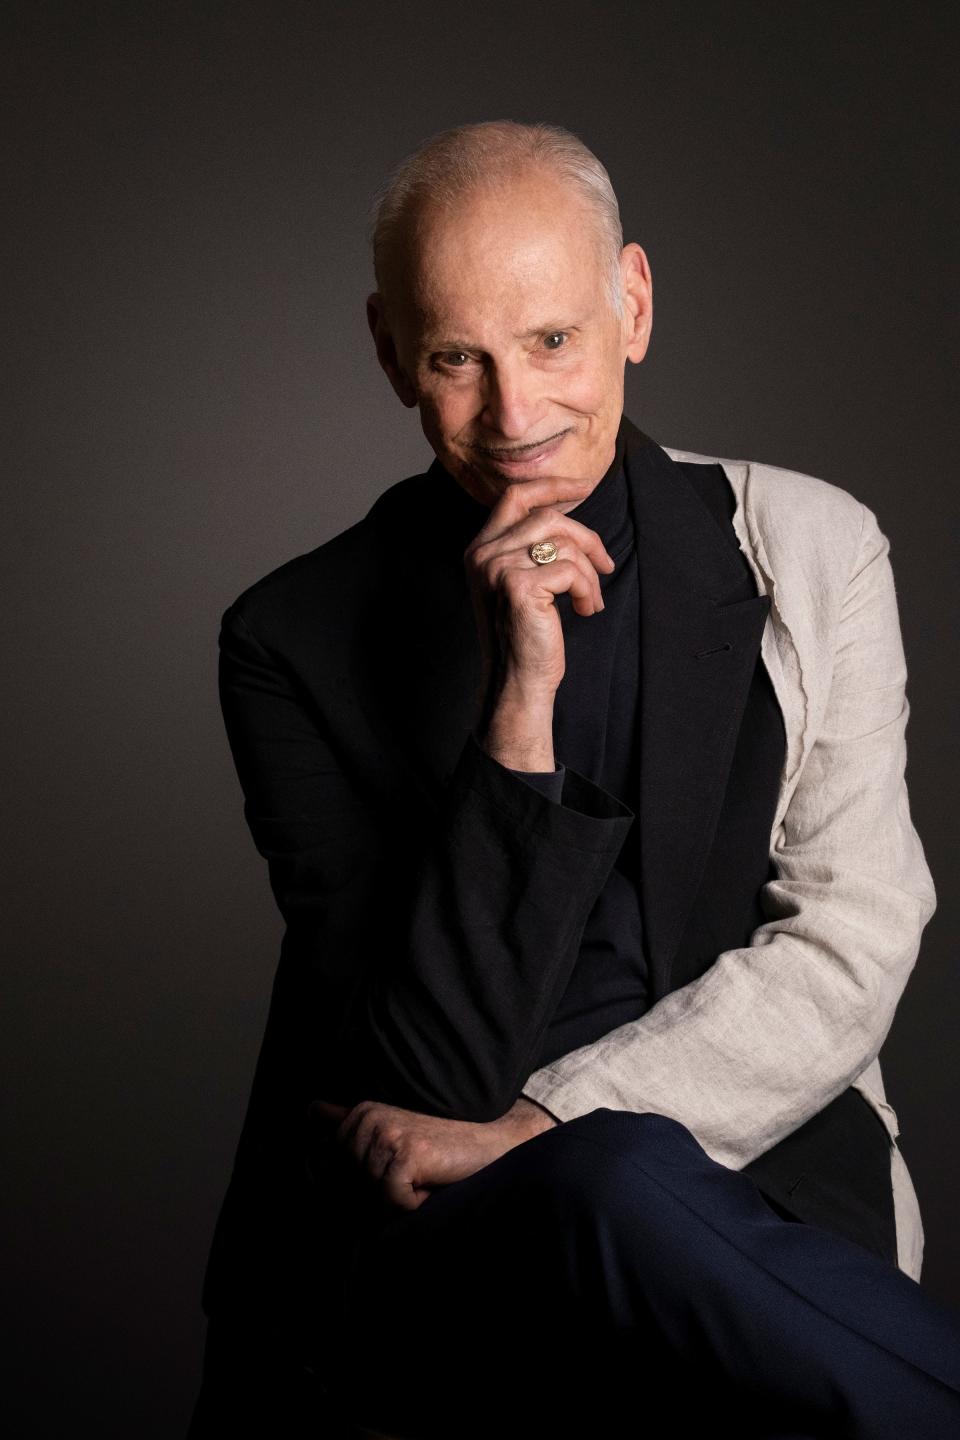 Legendary filmmaker John Waters will return to the Eastern Shore for the 8th Annual Ocean City Film Festival in Maryland. The festival is Thursday, March 7 through Sunday, March 10.